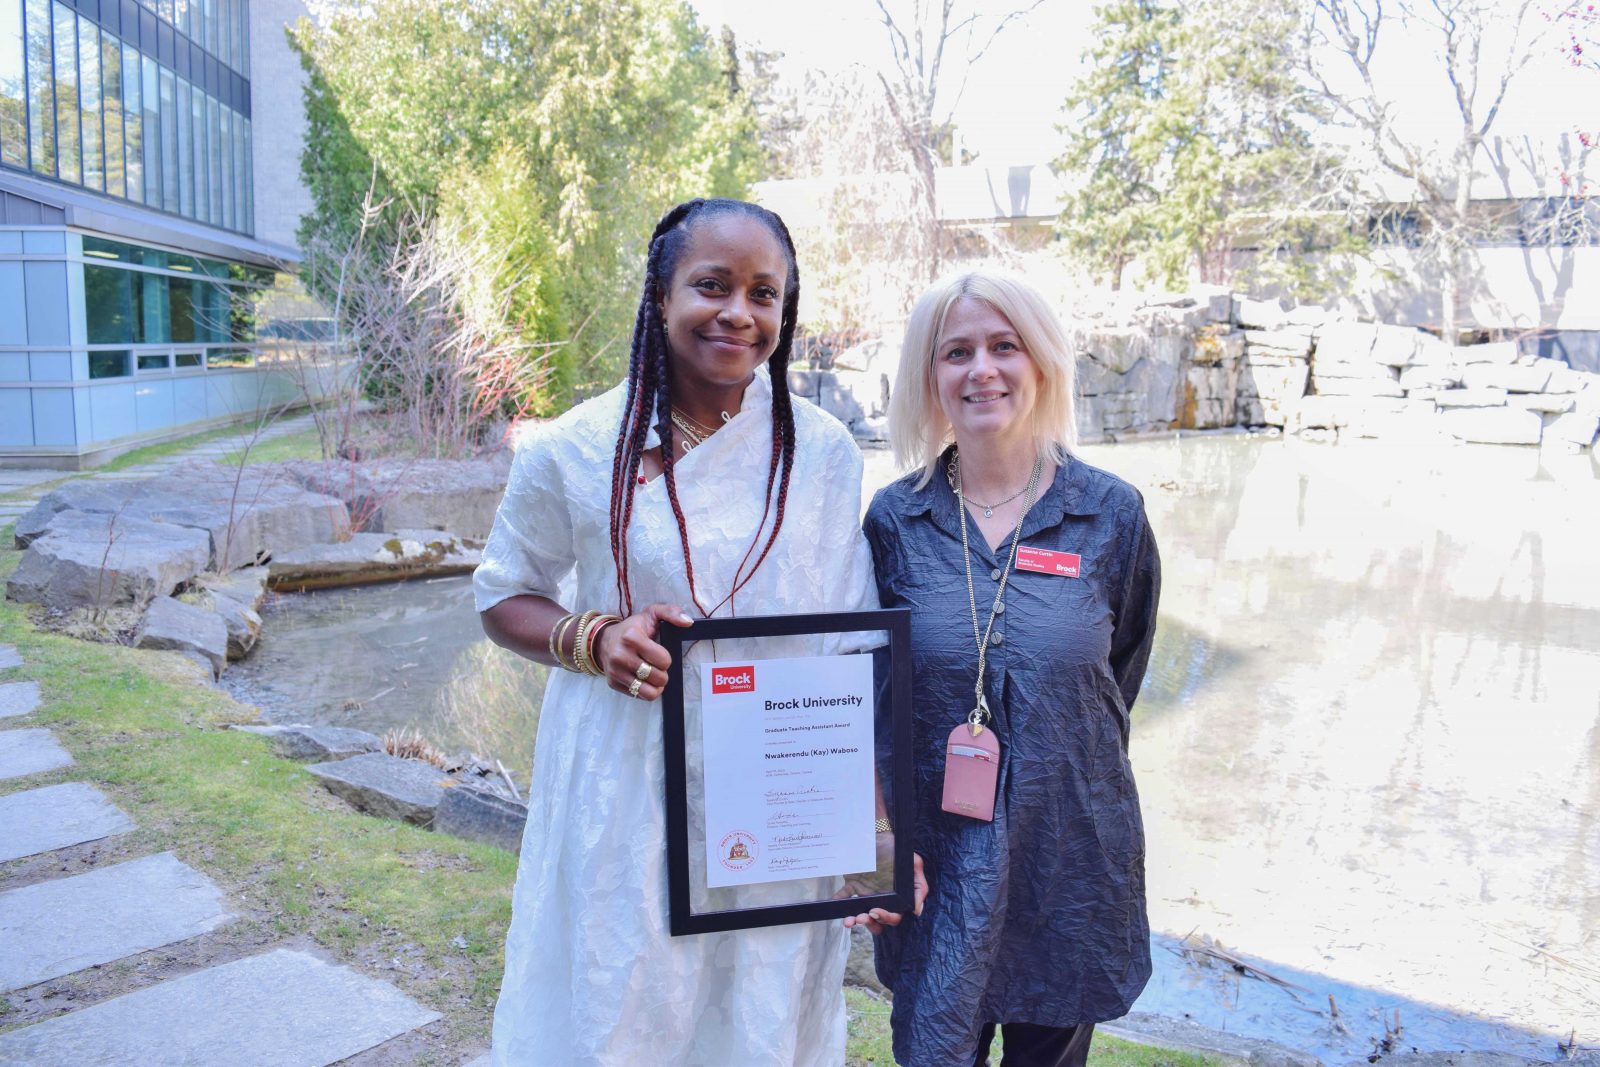 Two women pose as one holds a framed award in front of an outdoor pond.